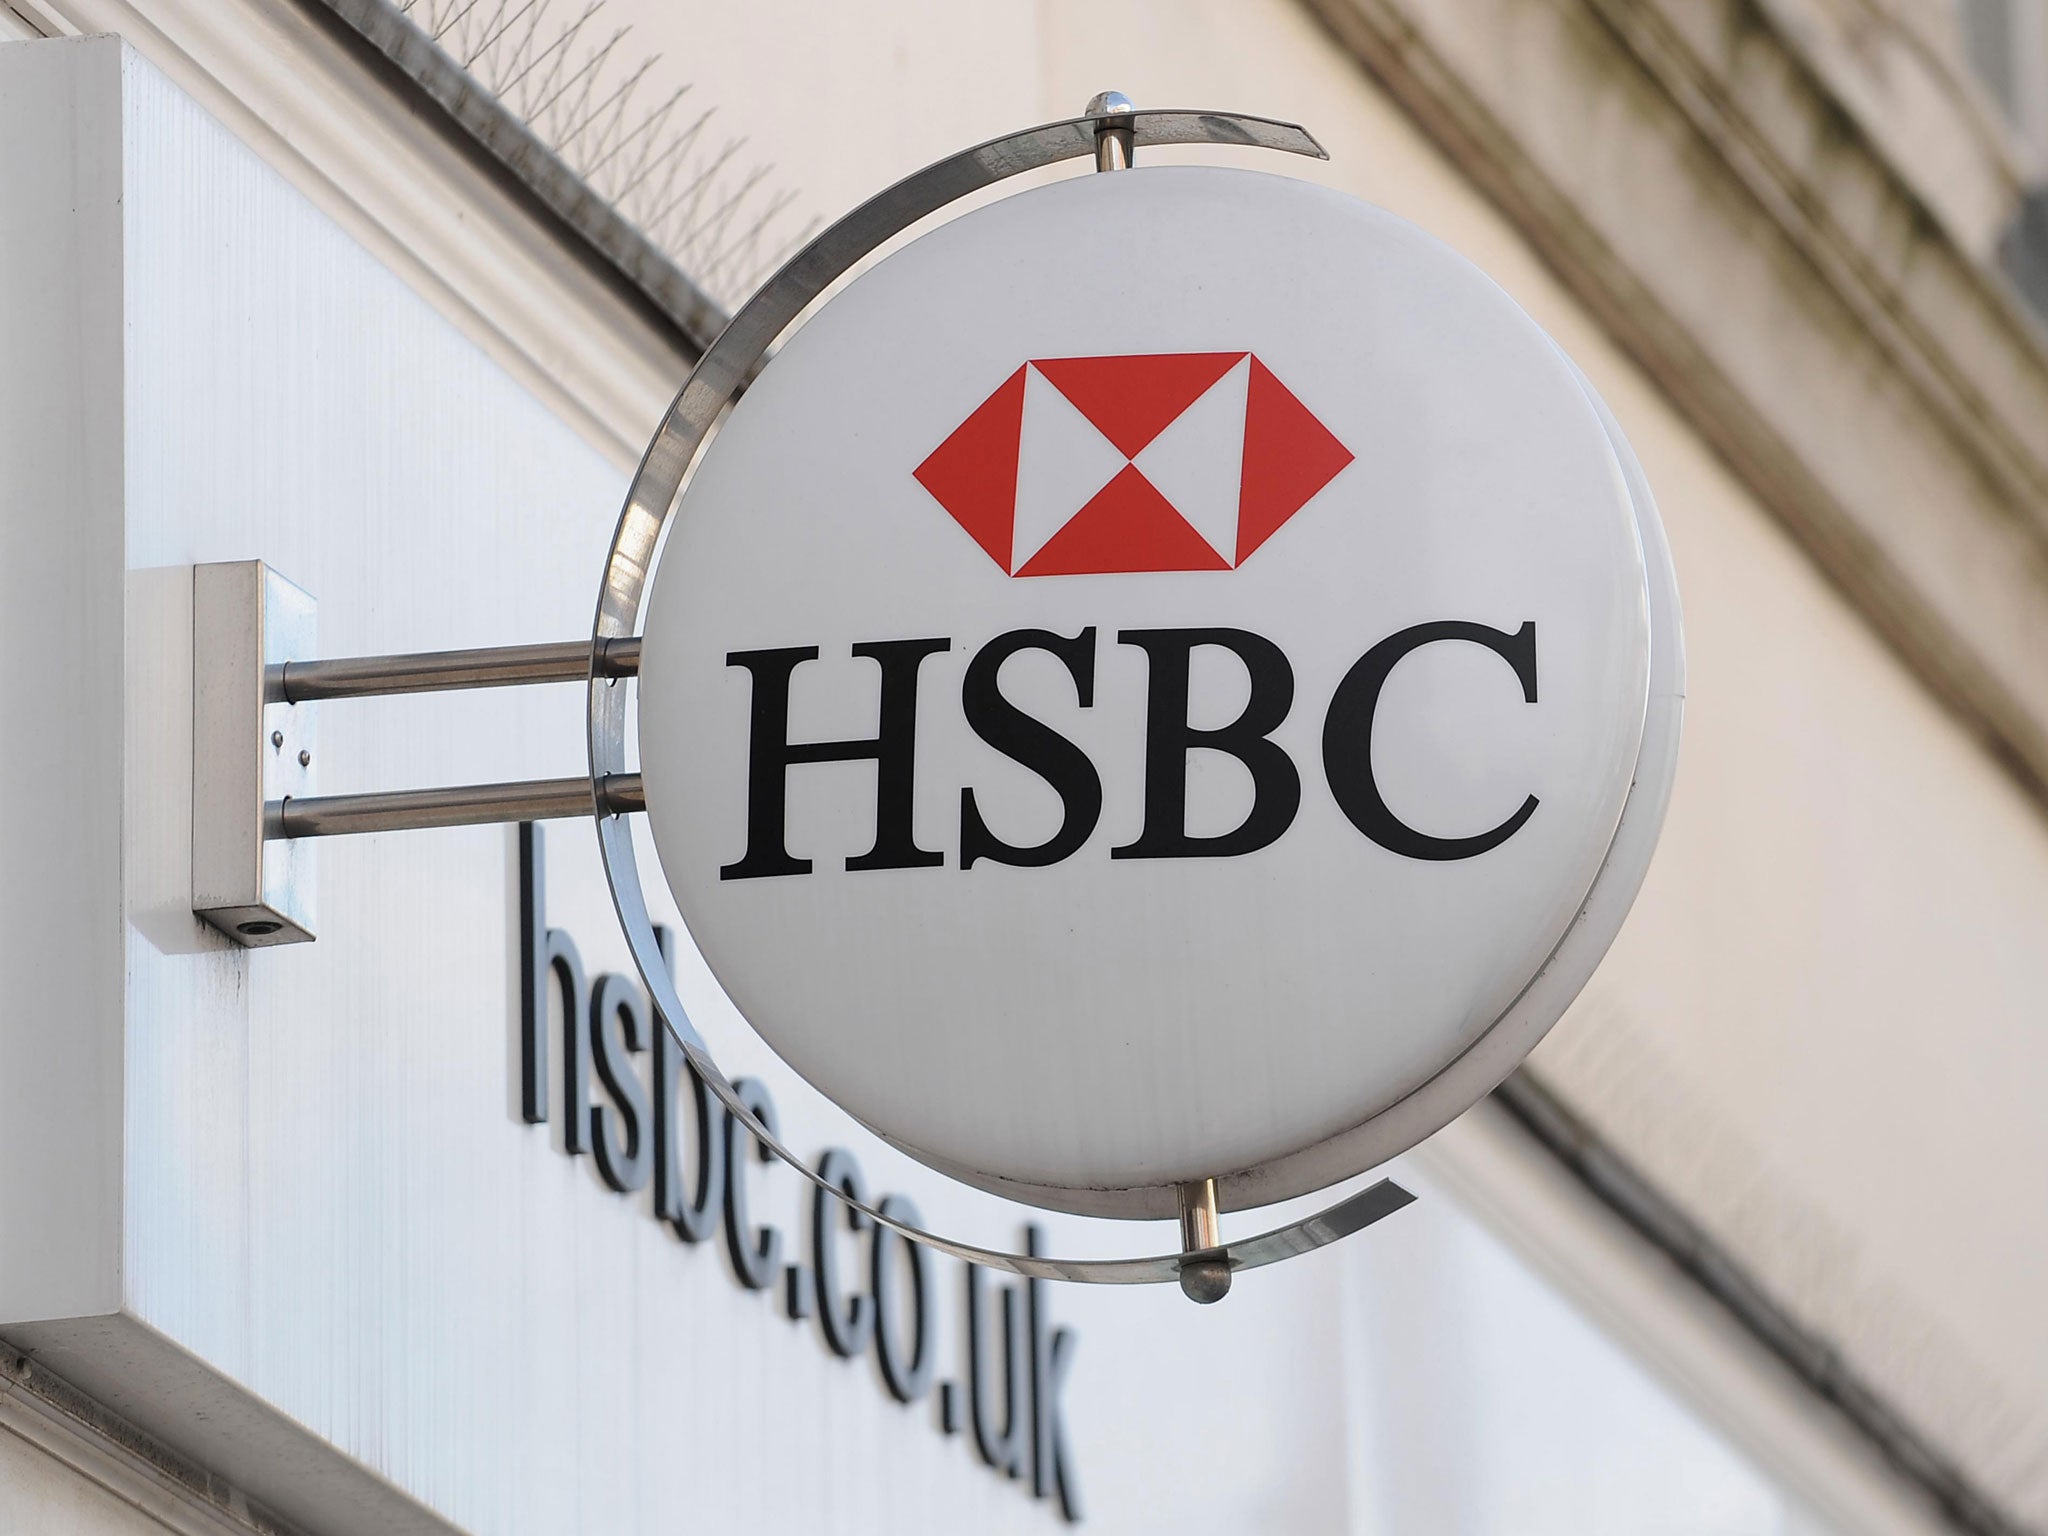 HSBC has asked foreign diplomats in London to close their accounts